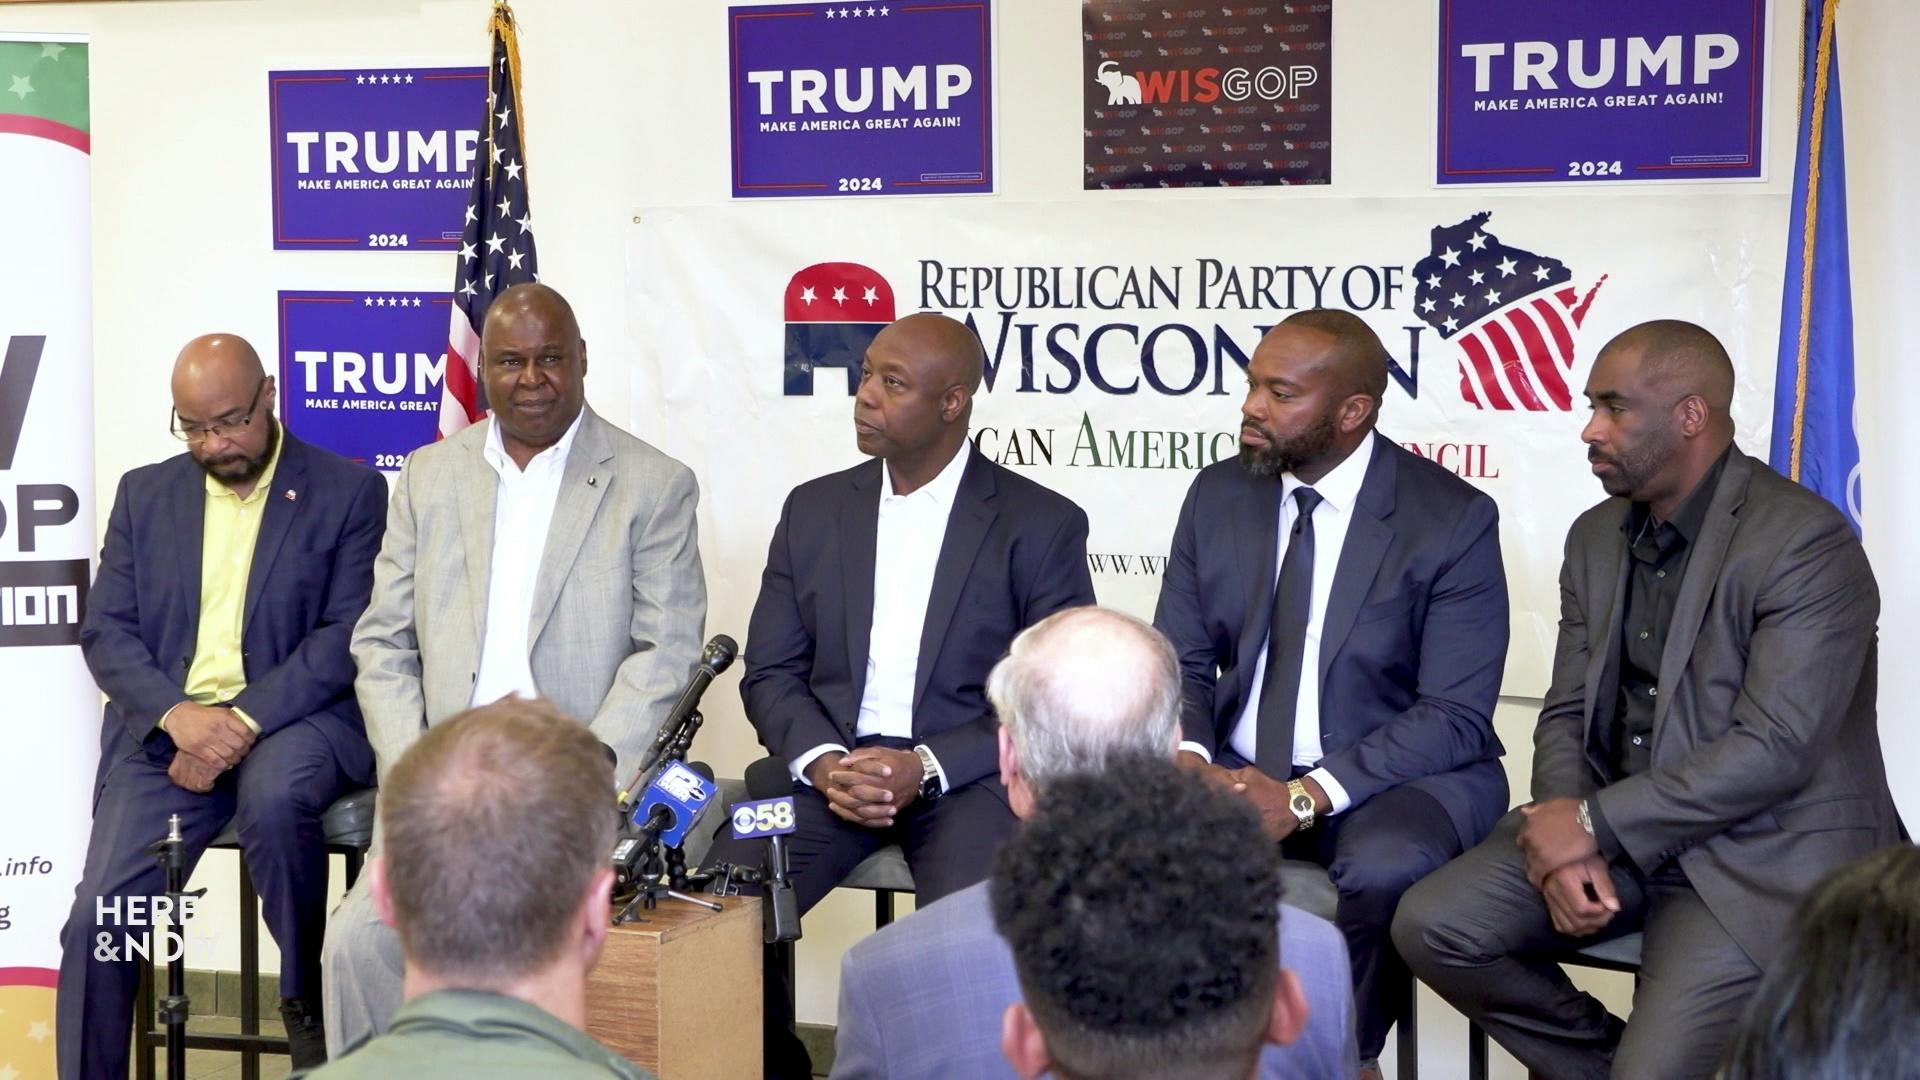 Five Black Republicans, including Senator Tim Scott, sit on chairs with Trump posters on the wall in the background.